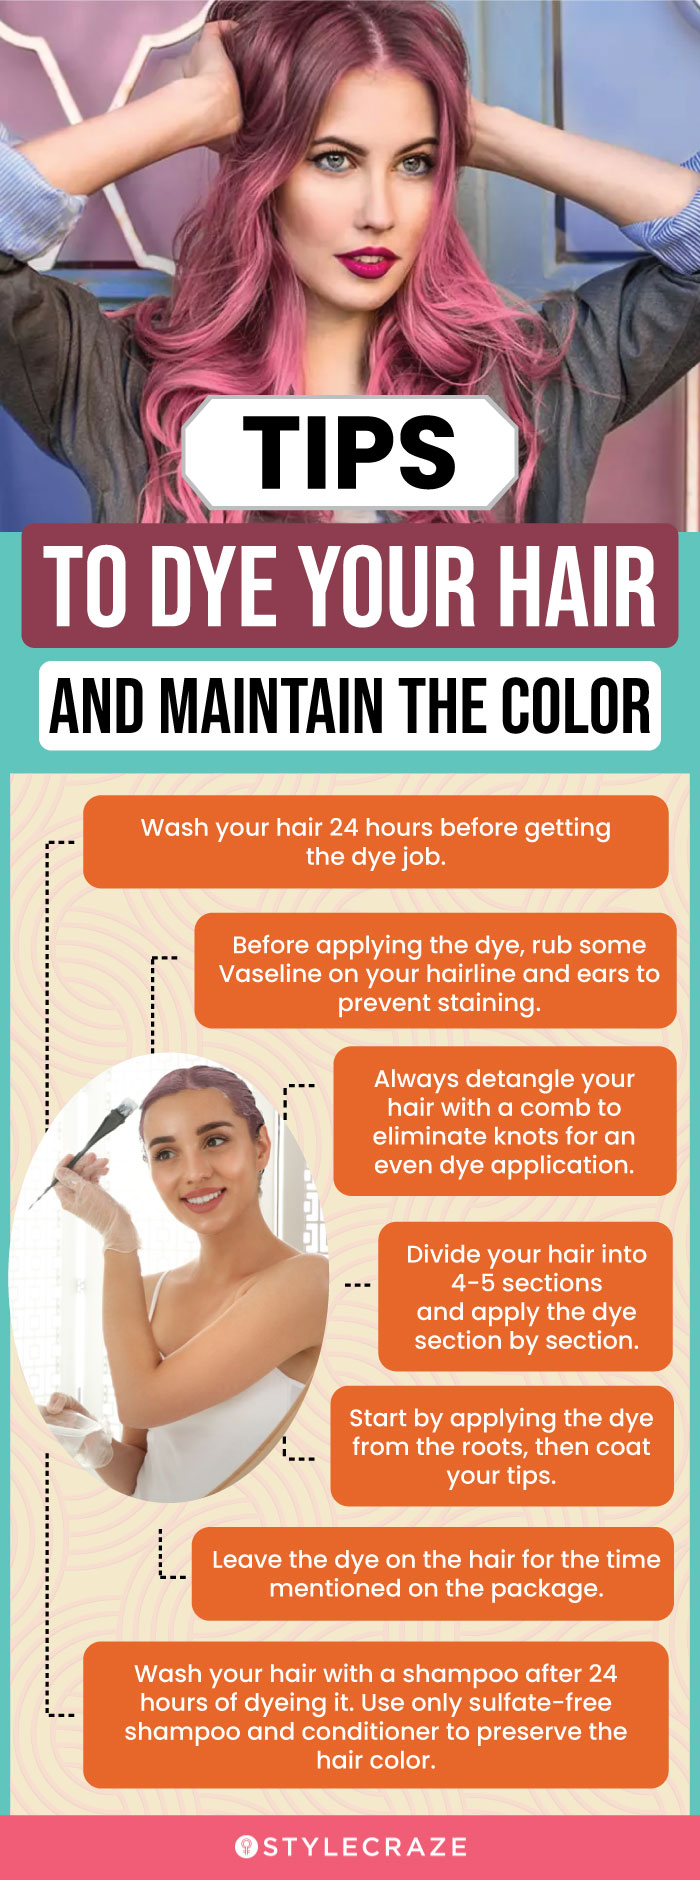 Tips To Dye Your Hair And Maintain The Color (infographic)